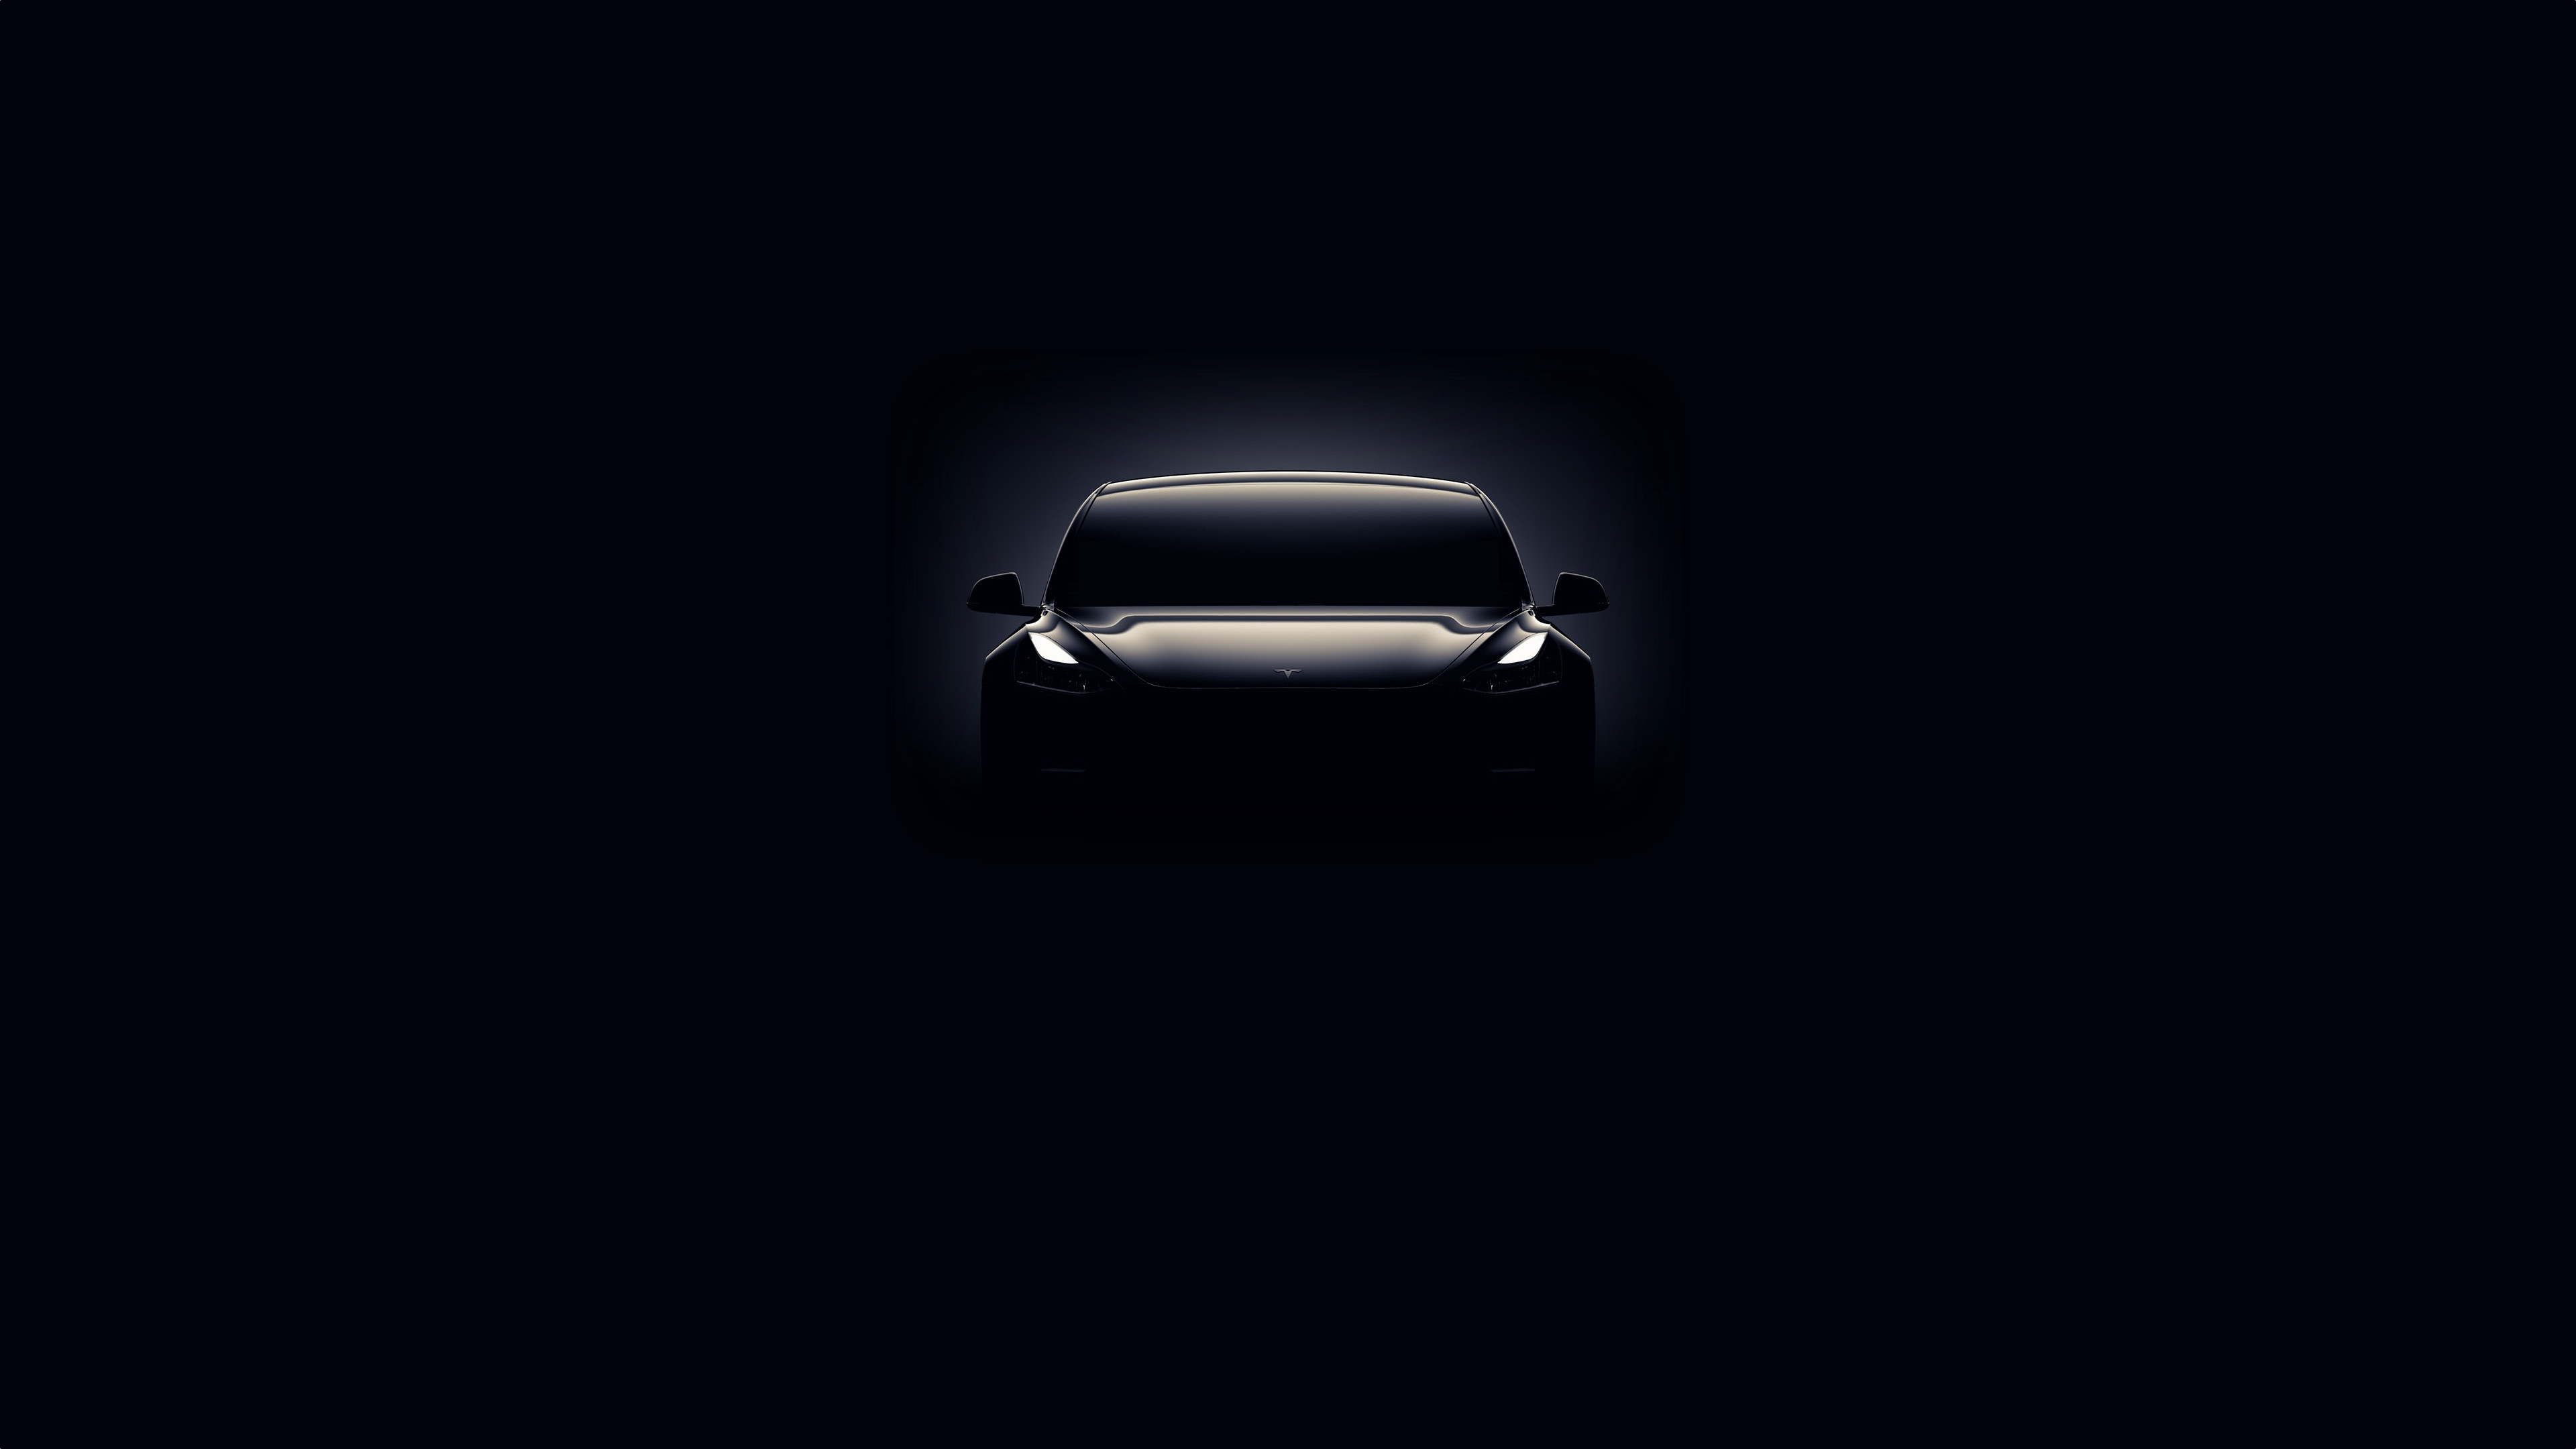 3840x2160 Model 3Created a desktop wallpaper from the Model 3 invite email.